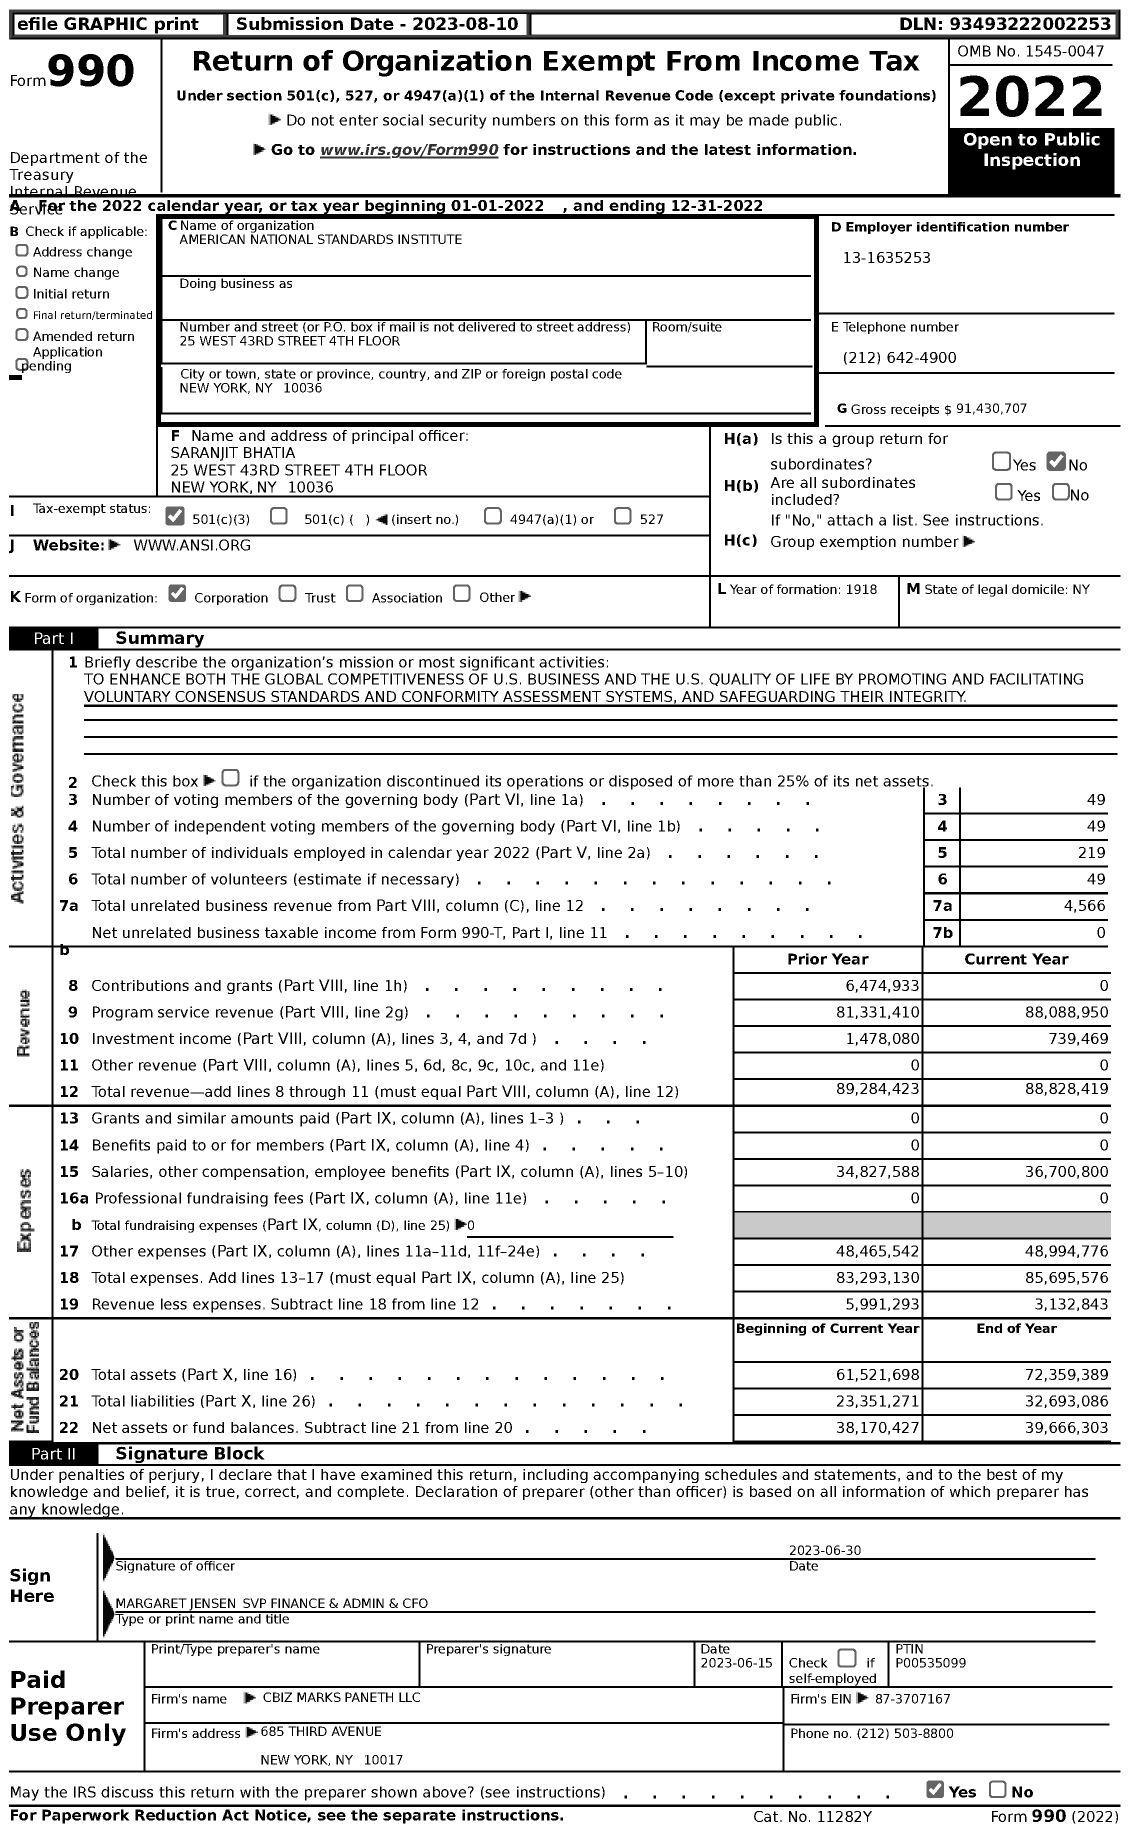 Image of first page of 2022 Form 990 for American National Standards Institute (ANSI)